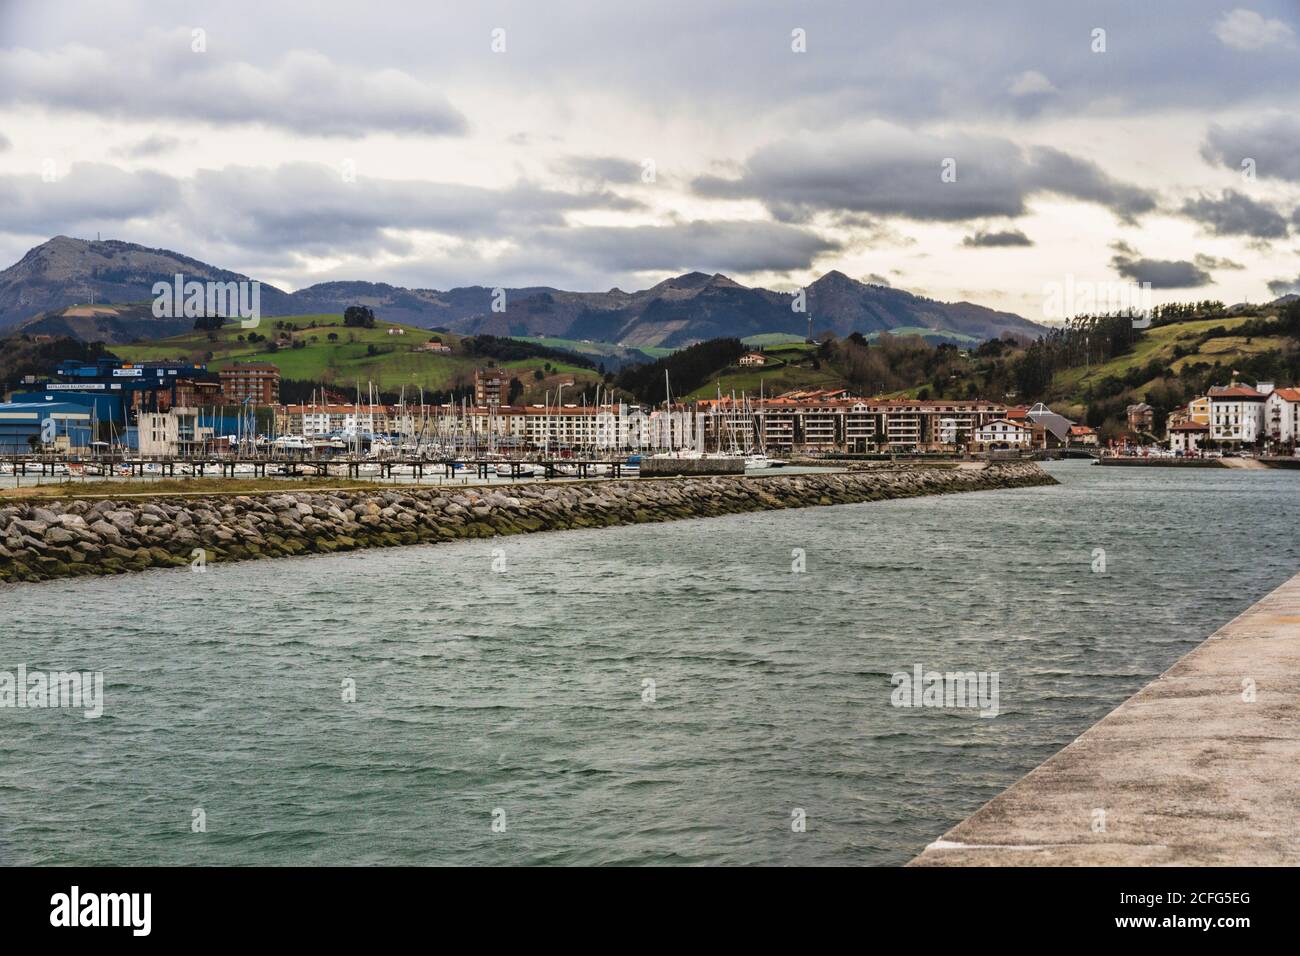 Town and port of Zumaia in Basque Country in Spain Stock Photo